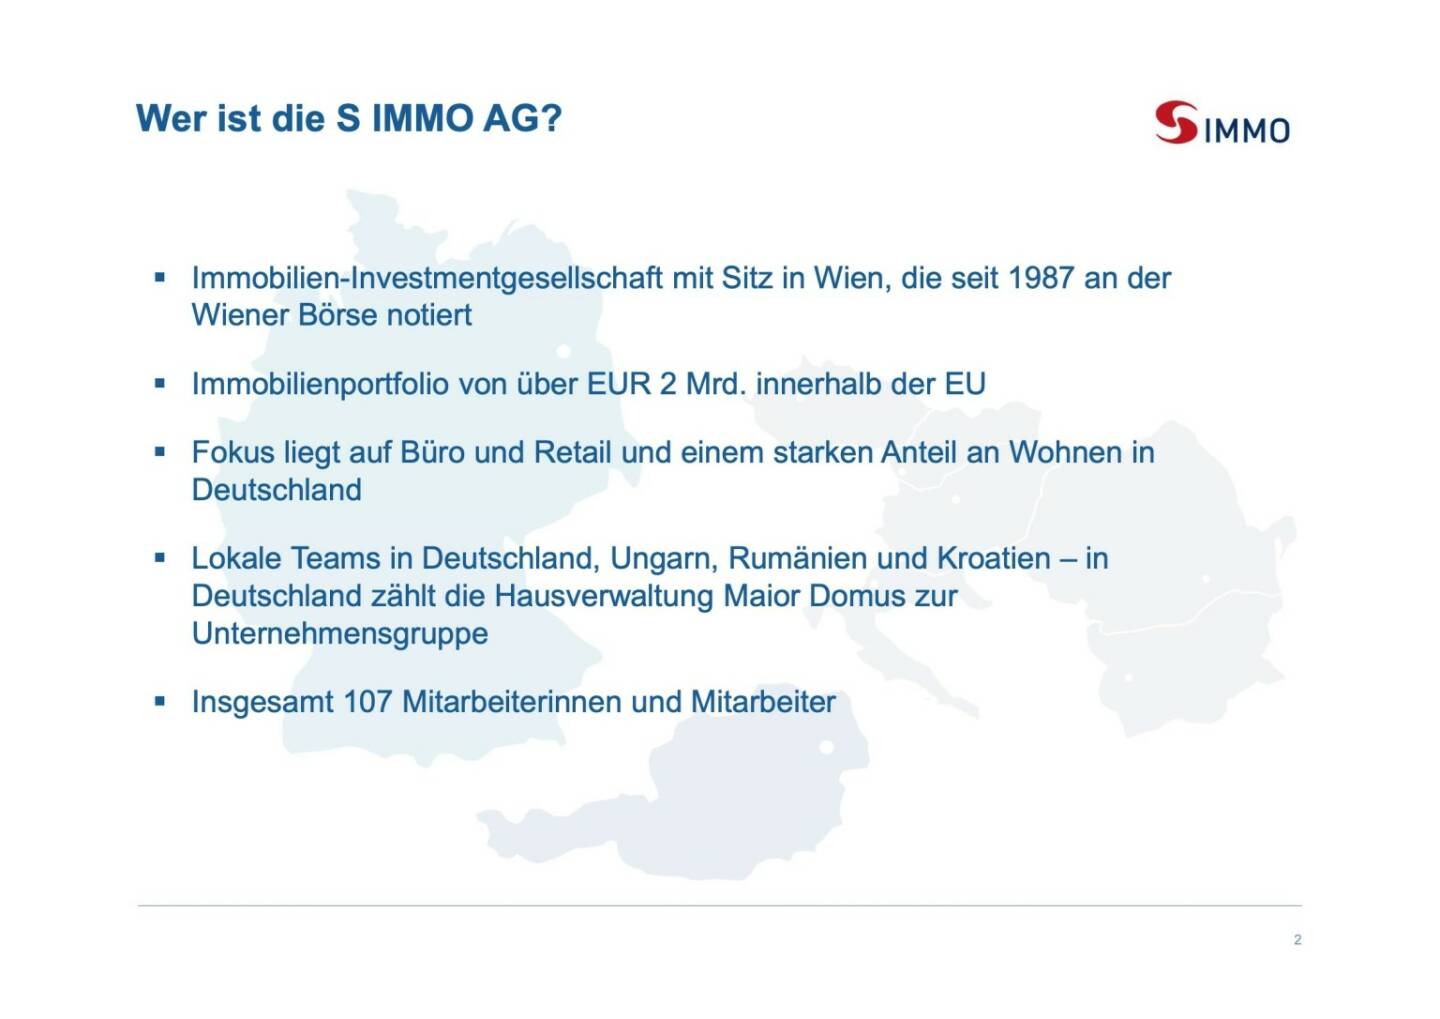 S Immo - Wer ist die S Immo AG?